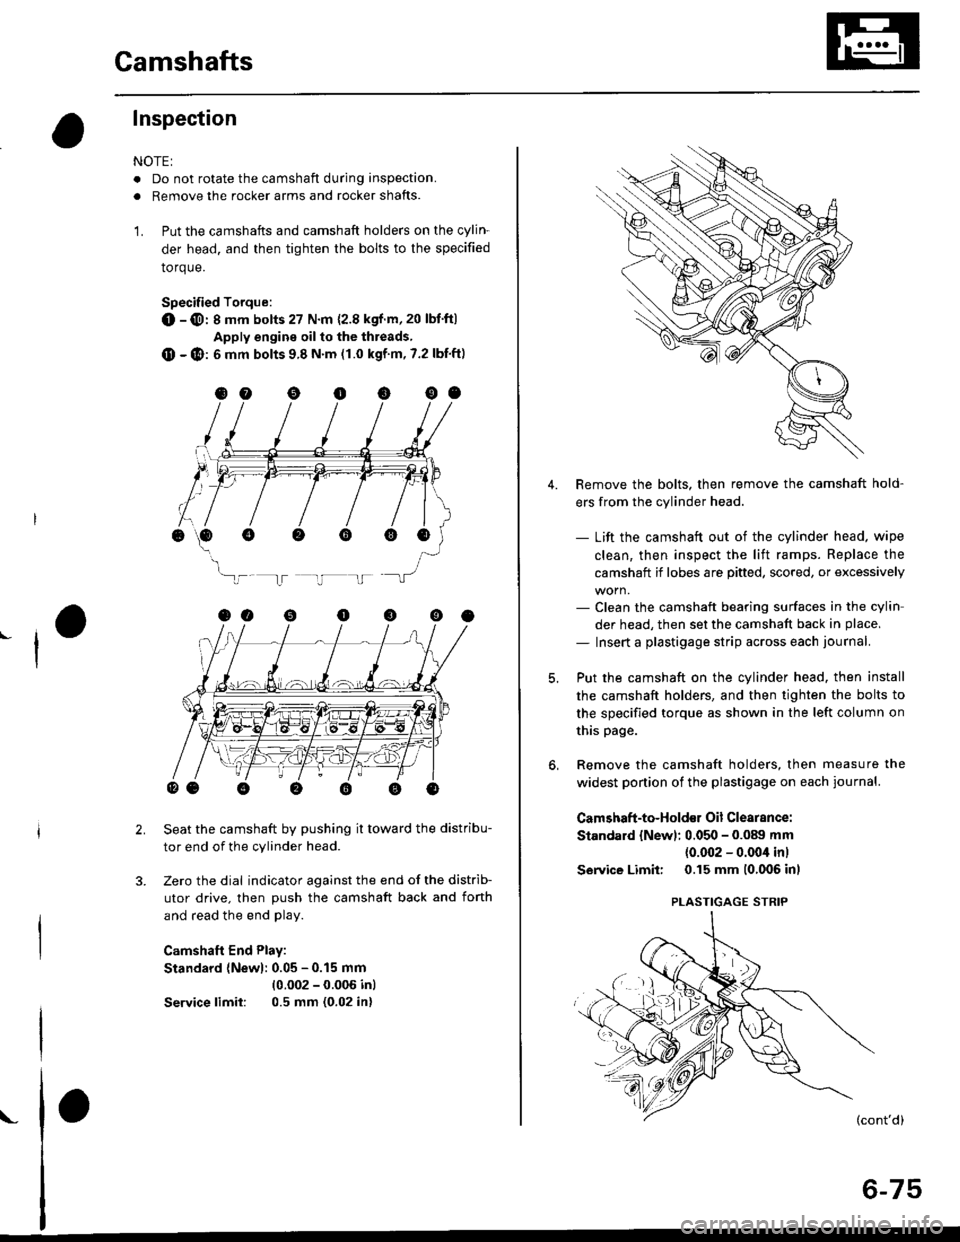 HONDA CIVIC 1998 6.G Owners Manual Camshafts
Inspection
NOTE:
. Do not rotate the camshaft during inspection.
. Removg the rocker arms and rocker shafts.
L Put the camshafts and camshaft holders on the cylin-
der head. and then tighte